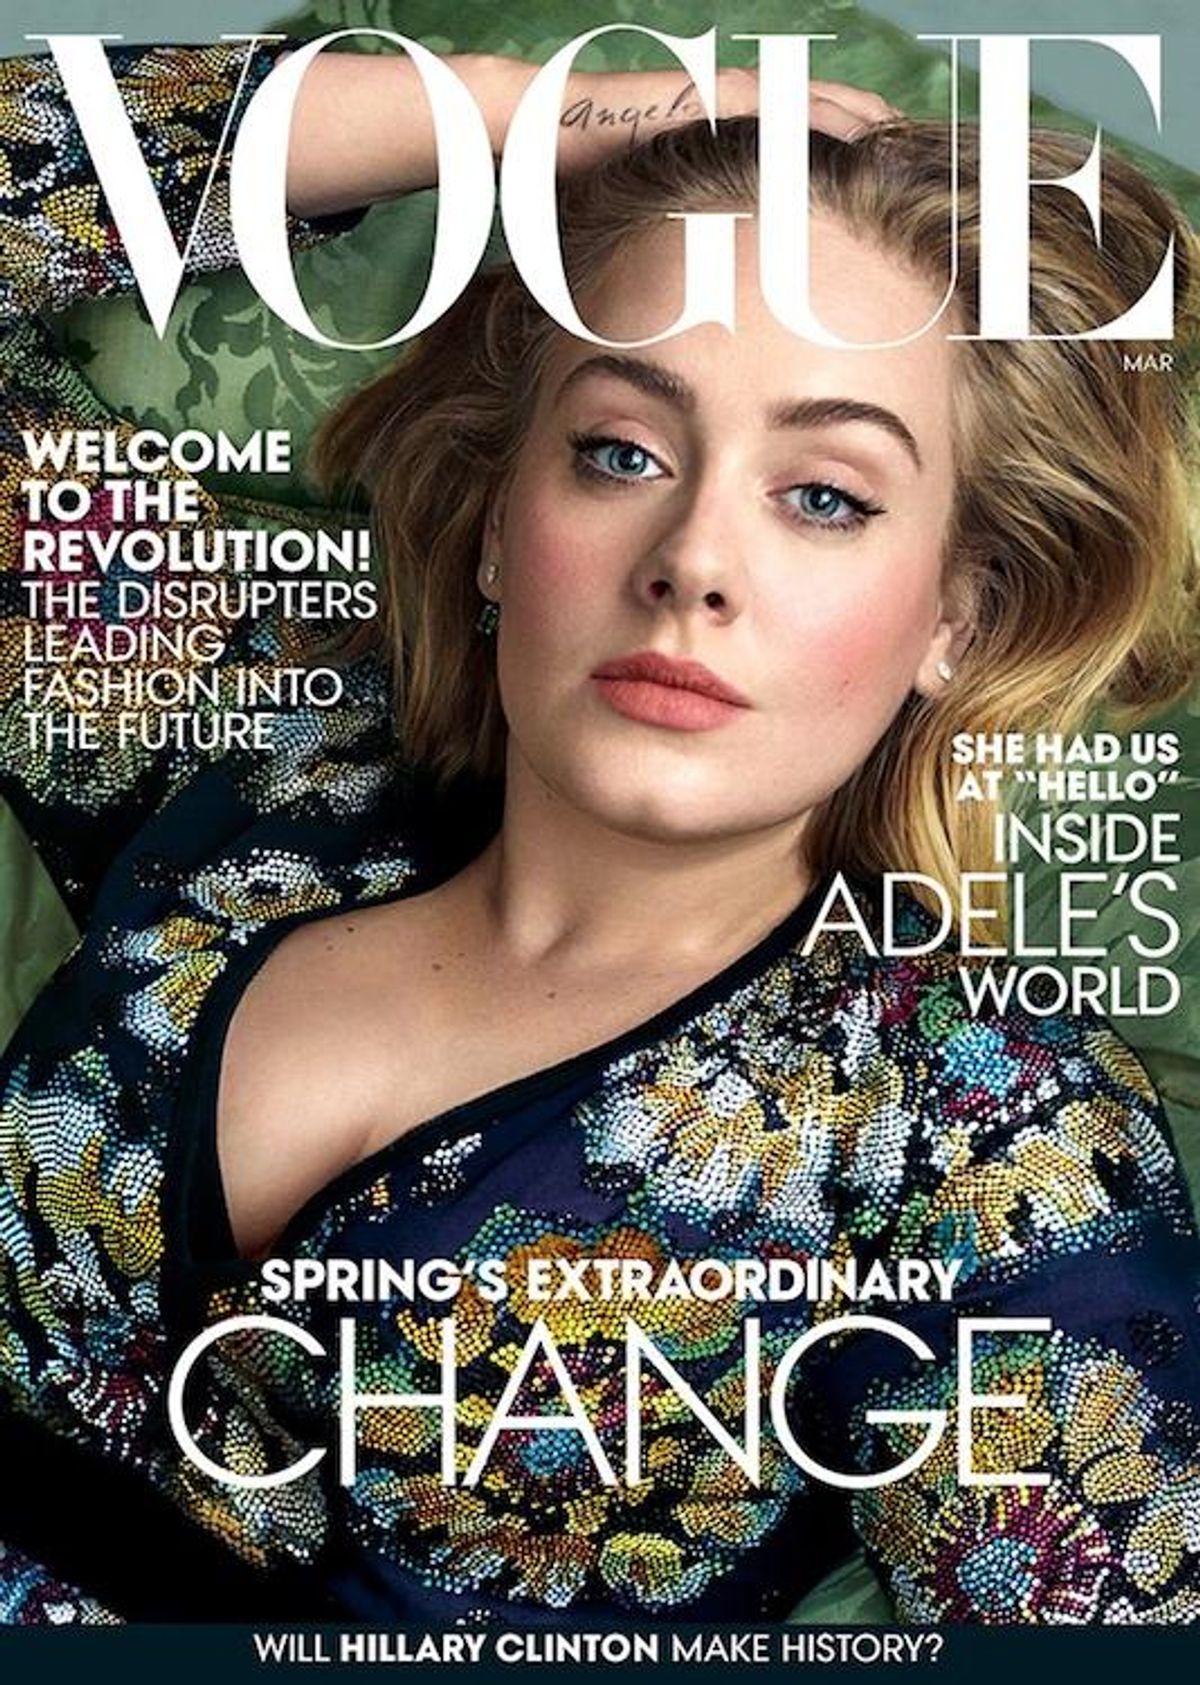 adele-vogue-cover-march-2016-620.jpg